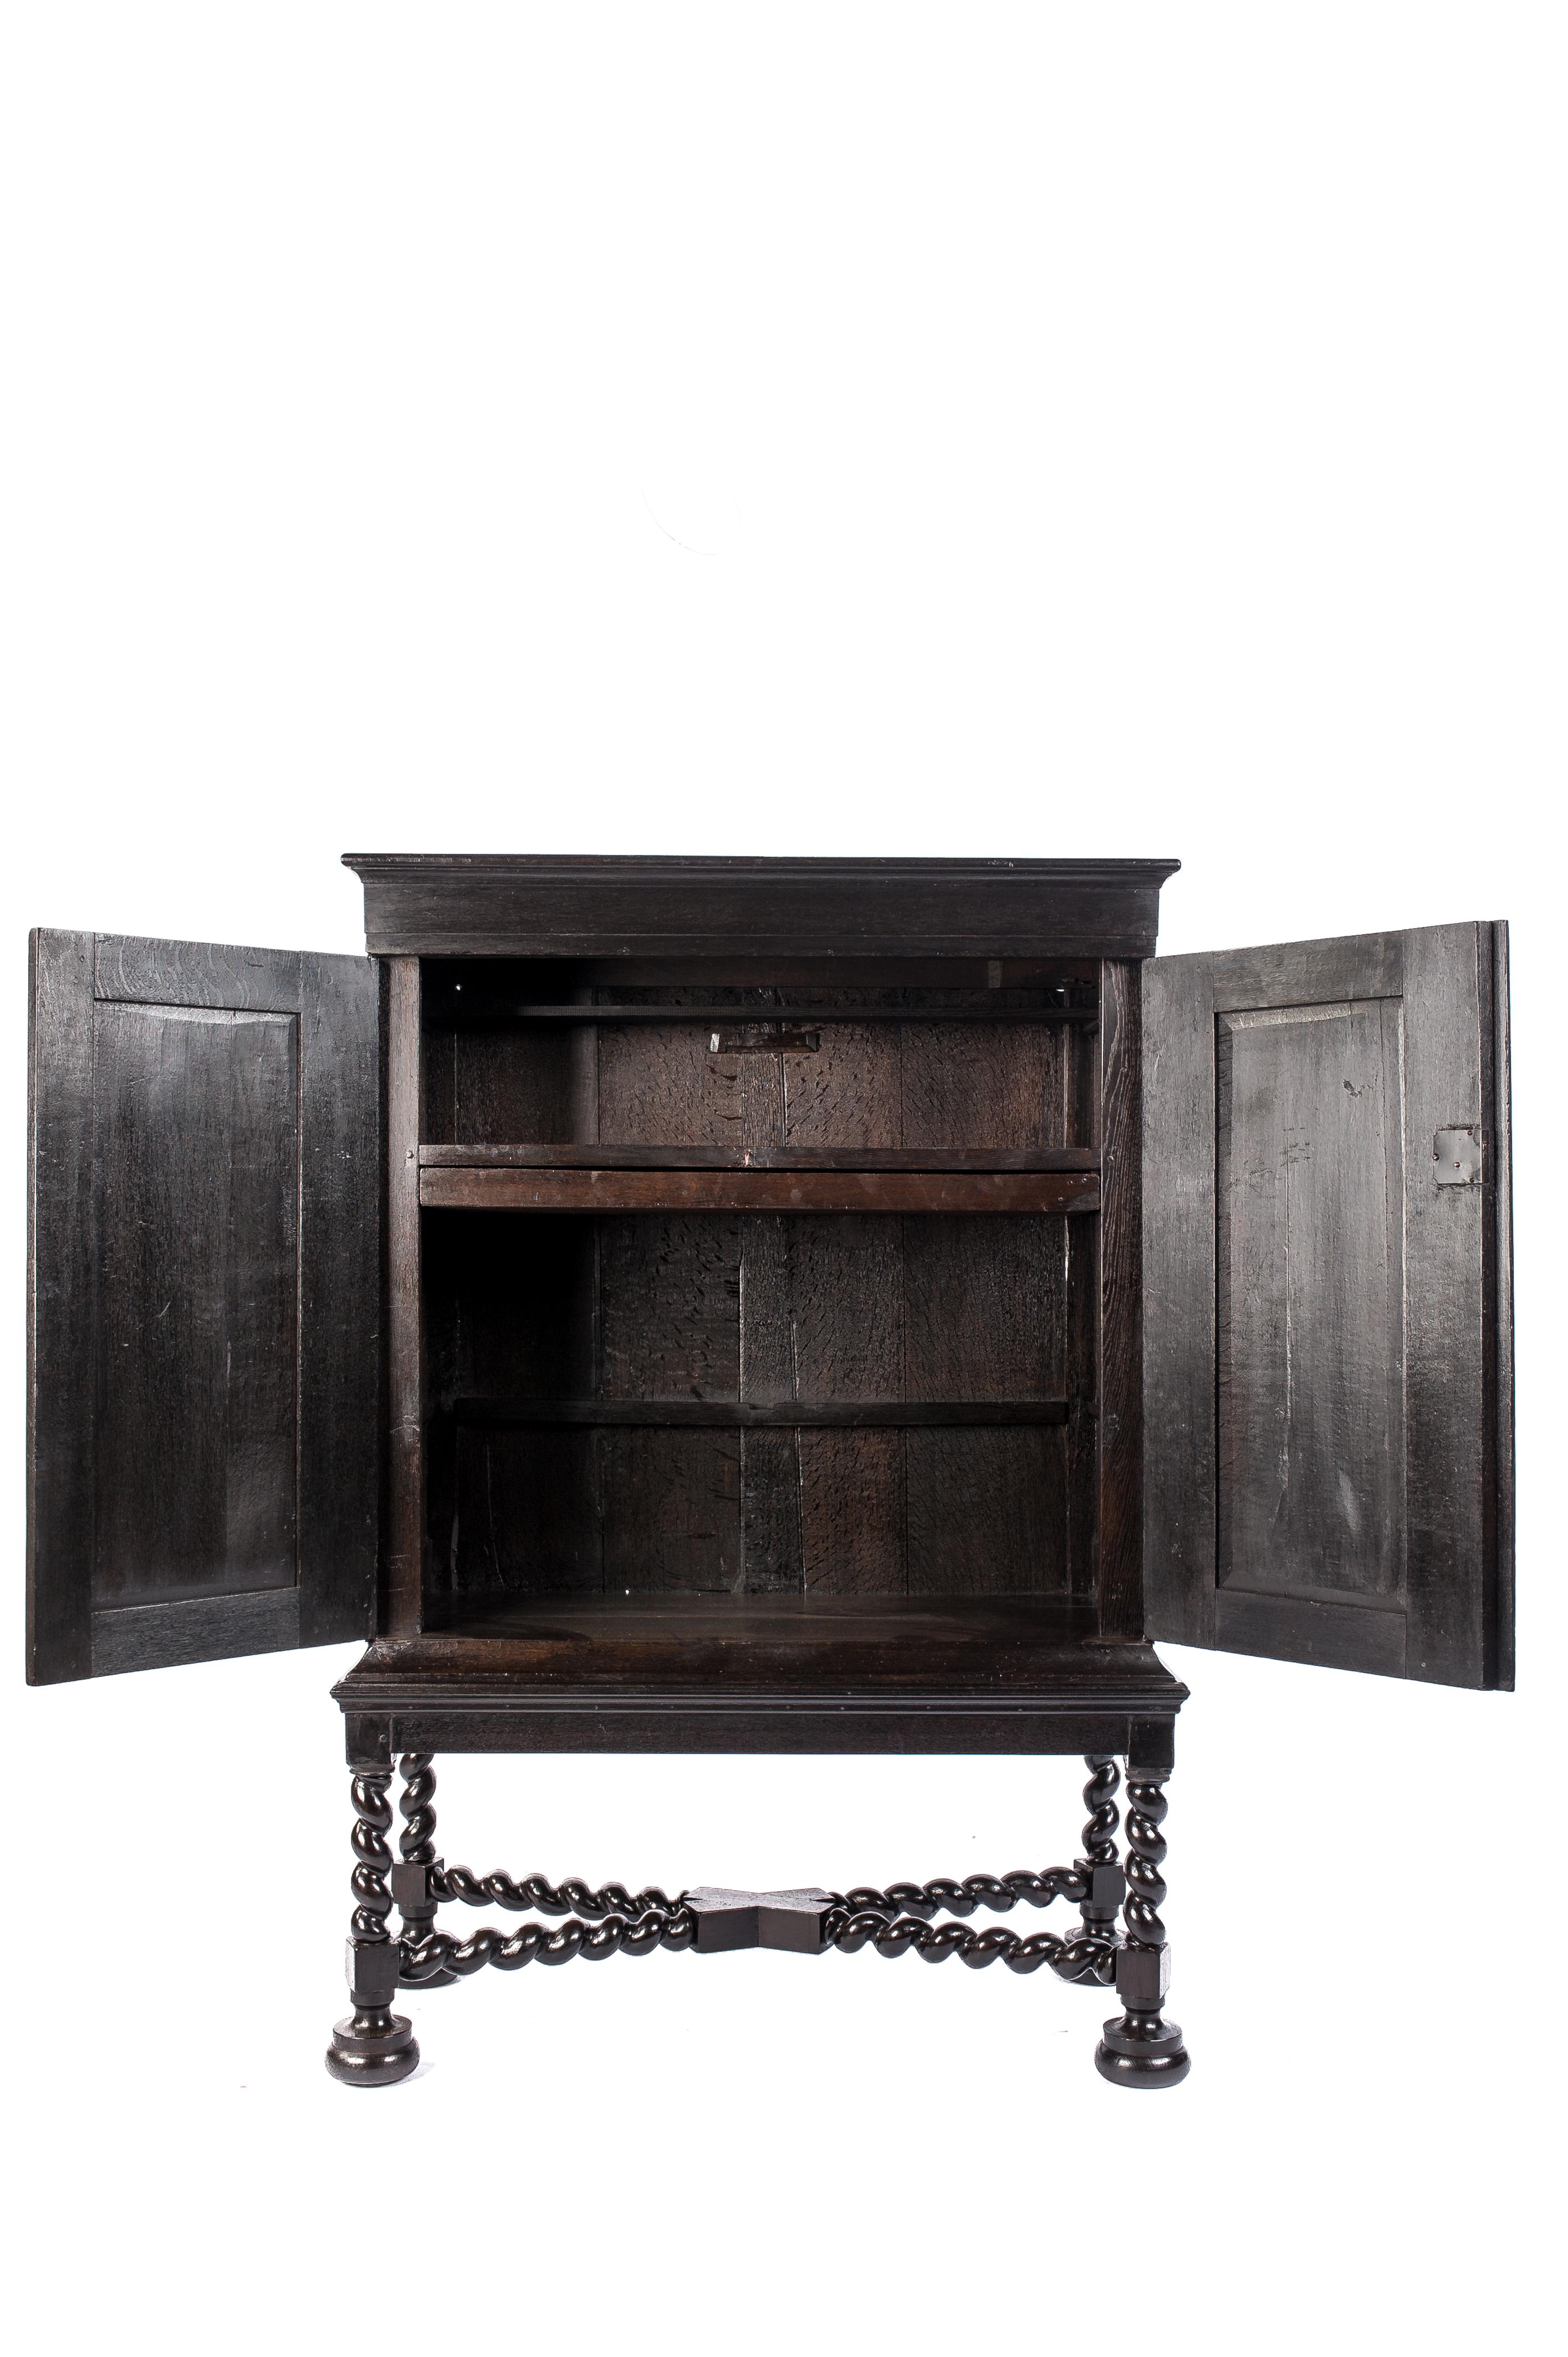 A beautiful handcrafted two-door cabinet that was made in The Netherlands at the end of the Dutch golden age. The piece consists of two pieces, an impressive barley twist base with a cross stretcher with a two-door cabinet on top. The cabinet was